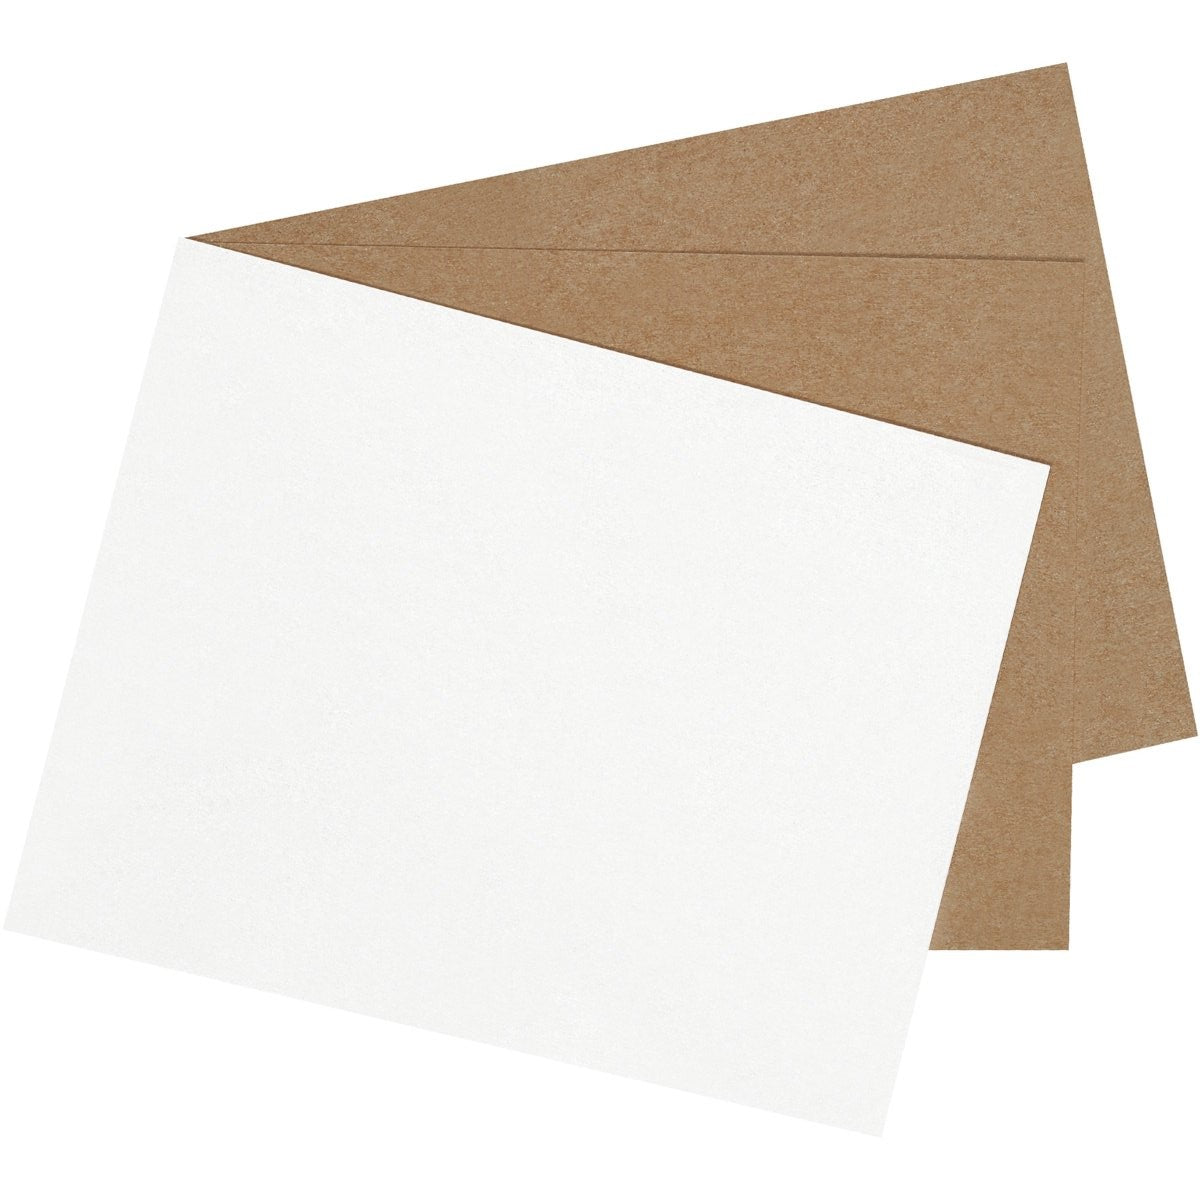 White Chipboard (White One Side) - Single Ply .046